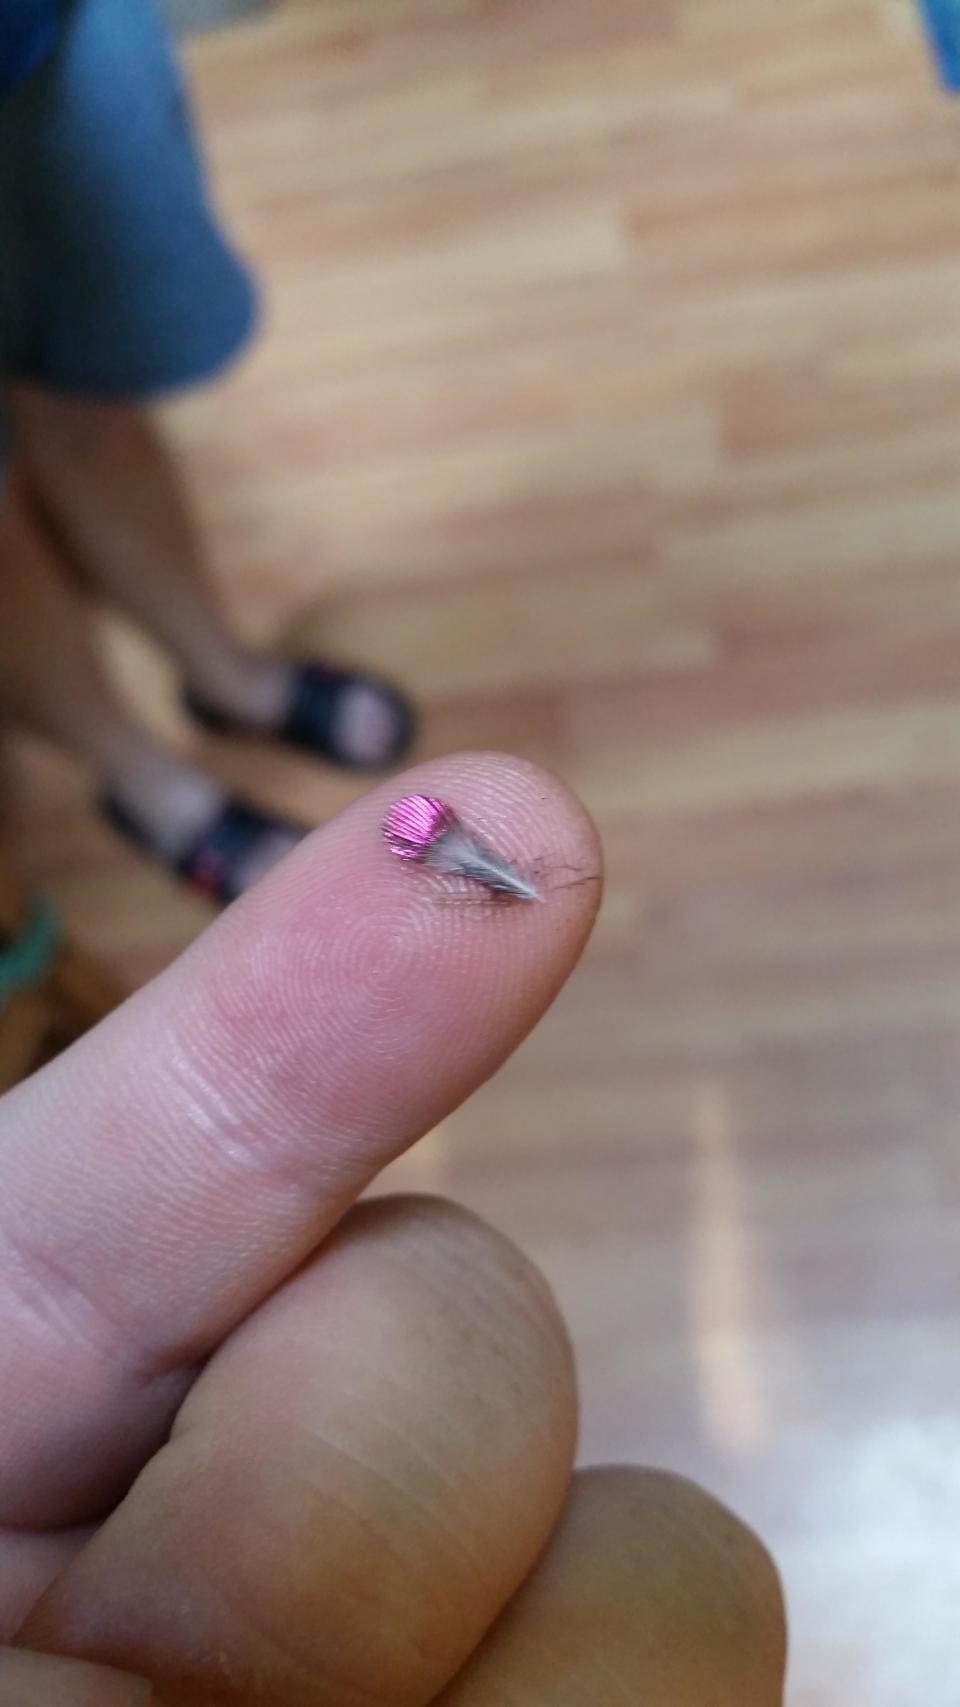 A tiny feather resting at the tip of someone's pointy finger